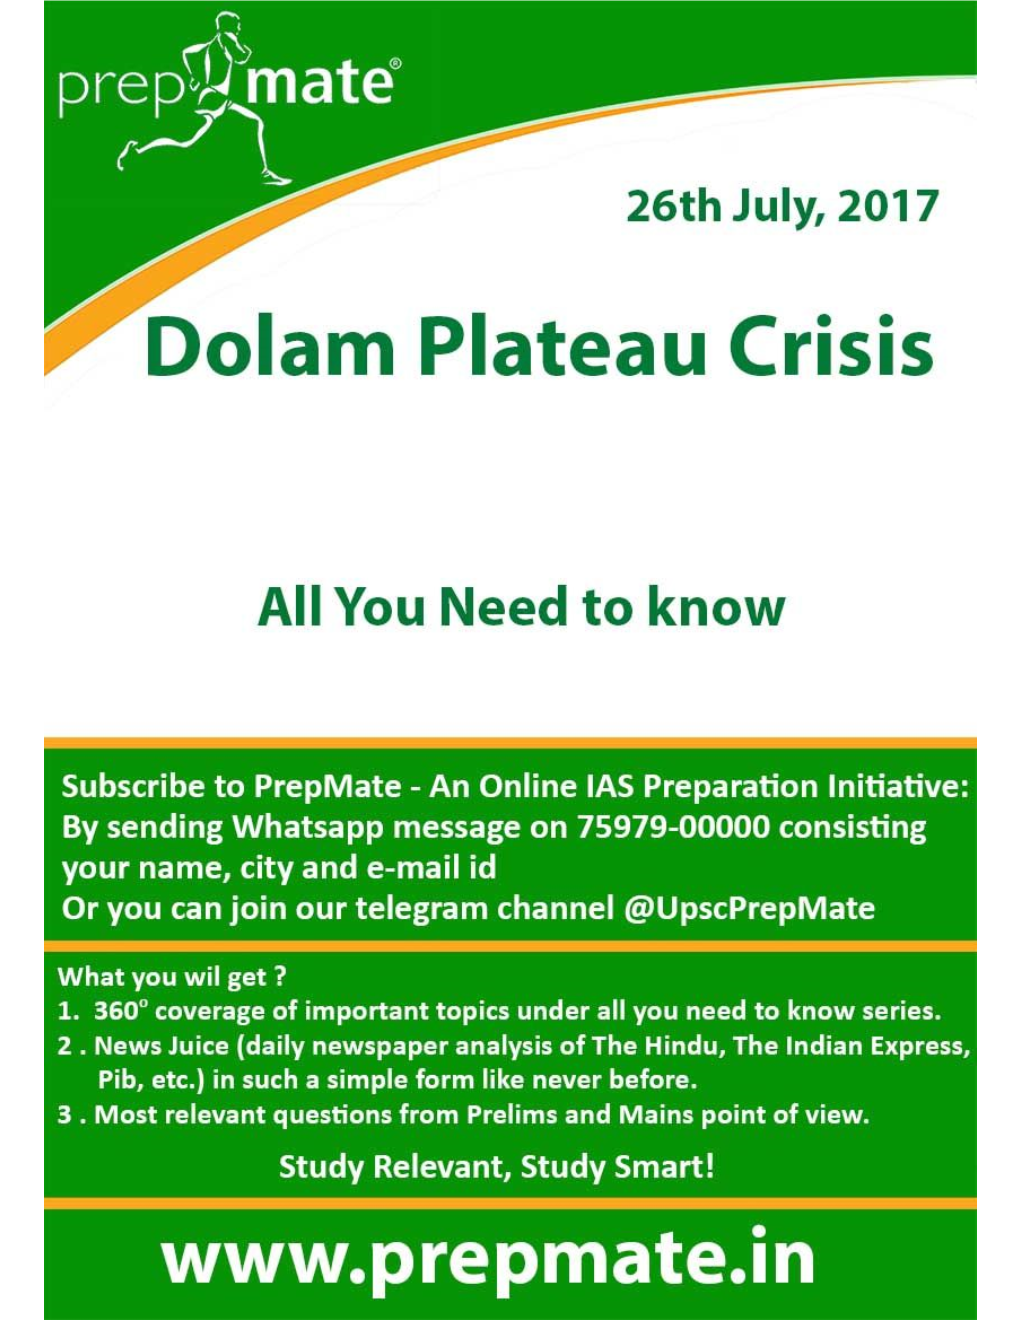 You Need to Know About the Dolam Plateau Crisis